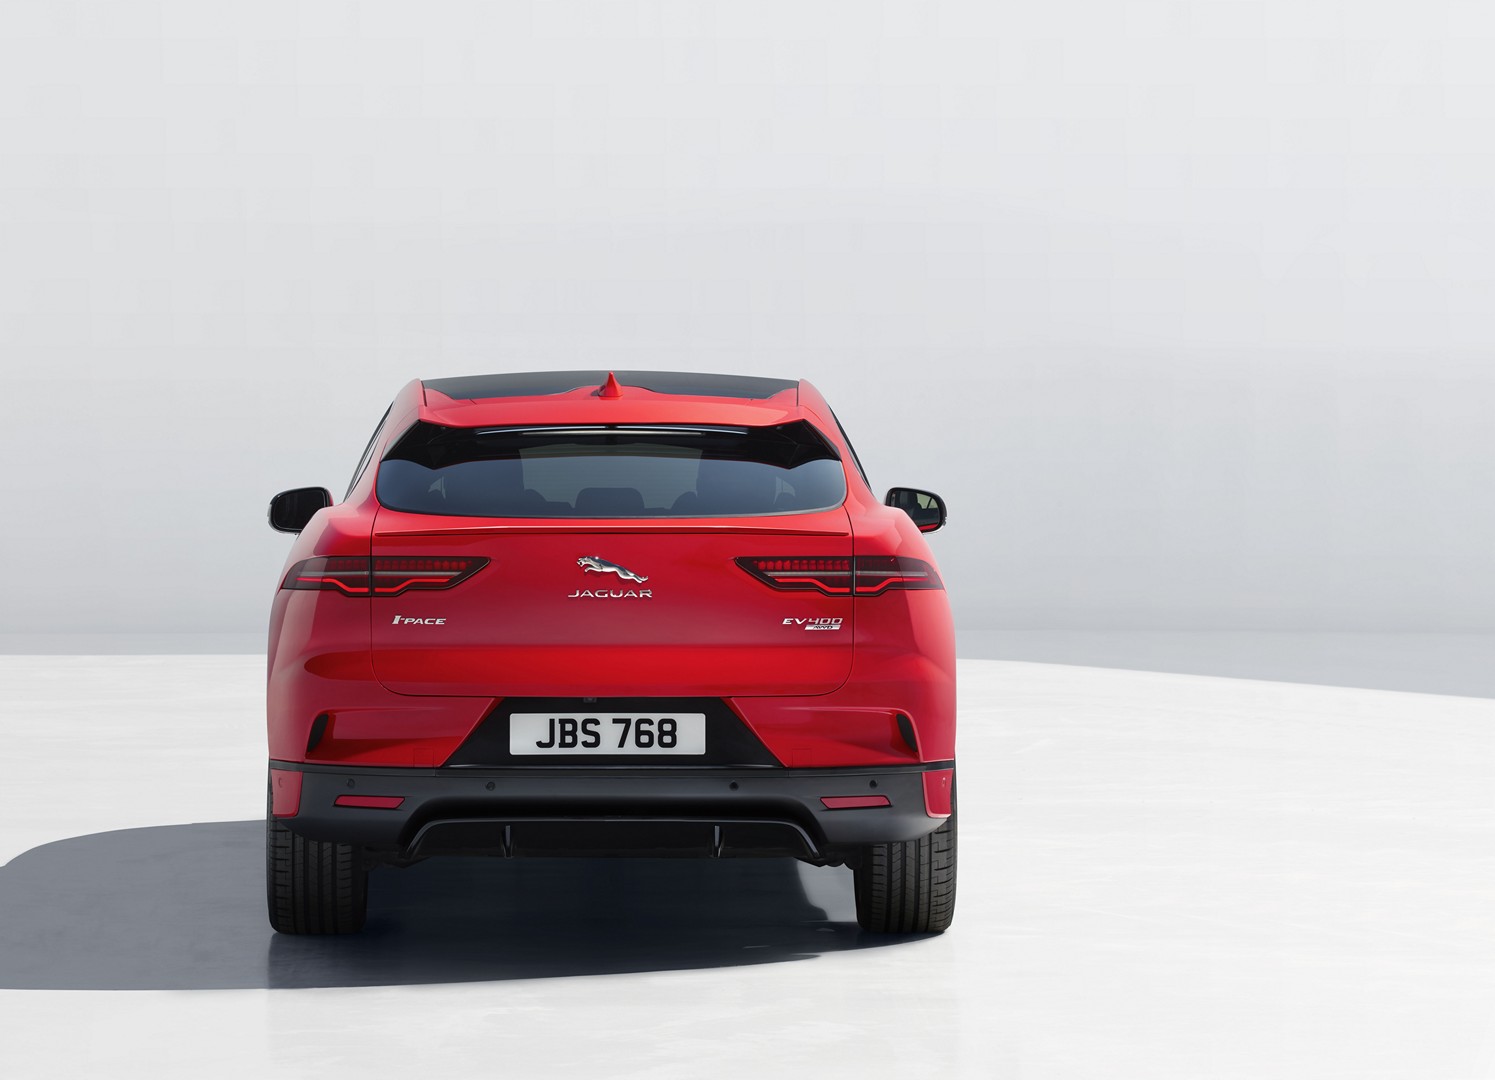 https://s1.cdn.autoevolution.com/images/news/gallery/2020-jaguar-i-pace-update-offers-234-miles-of-range-thanks-to-etrophy-know-how_7.jpg